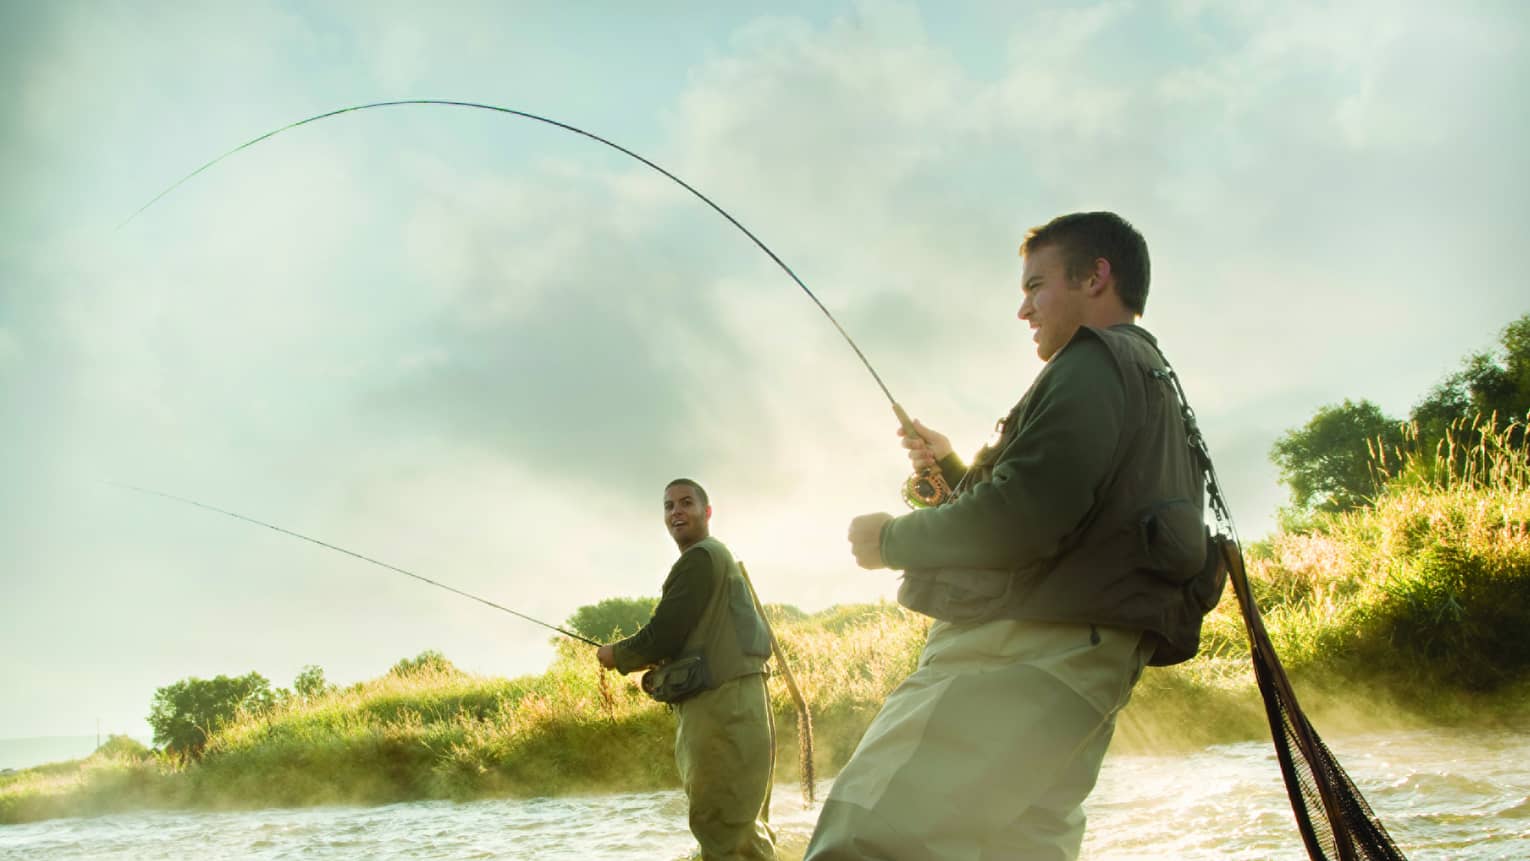 Two men standing in the water, holding rods fly fishing 